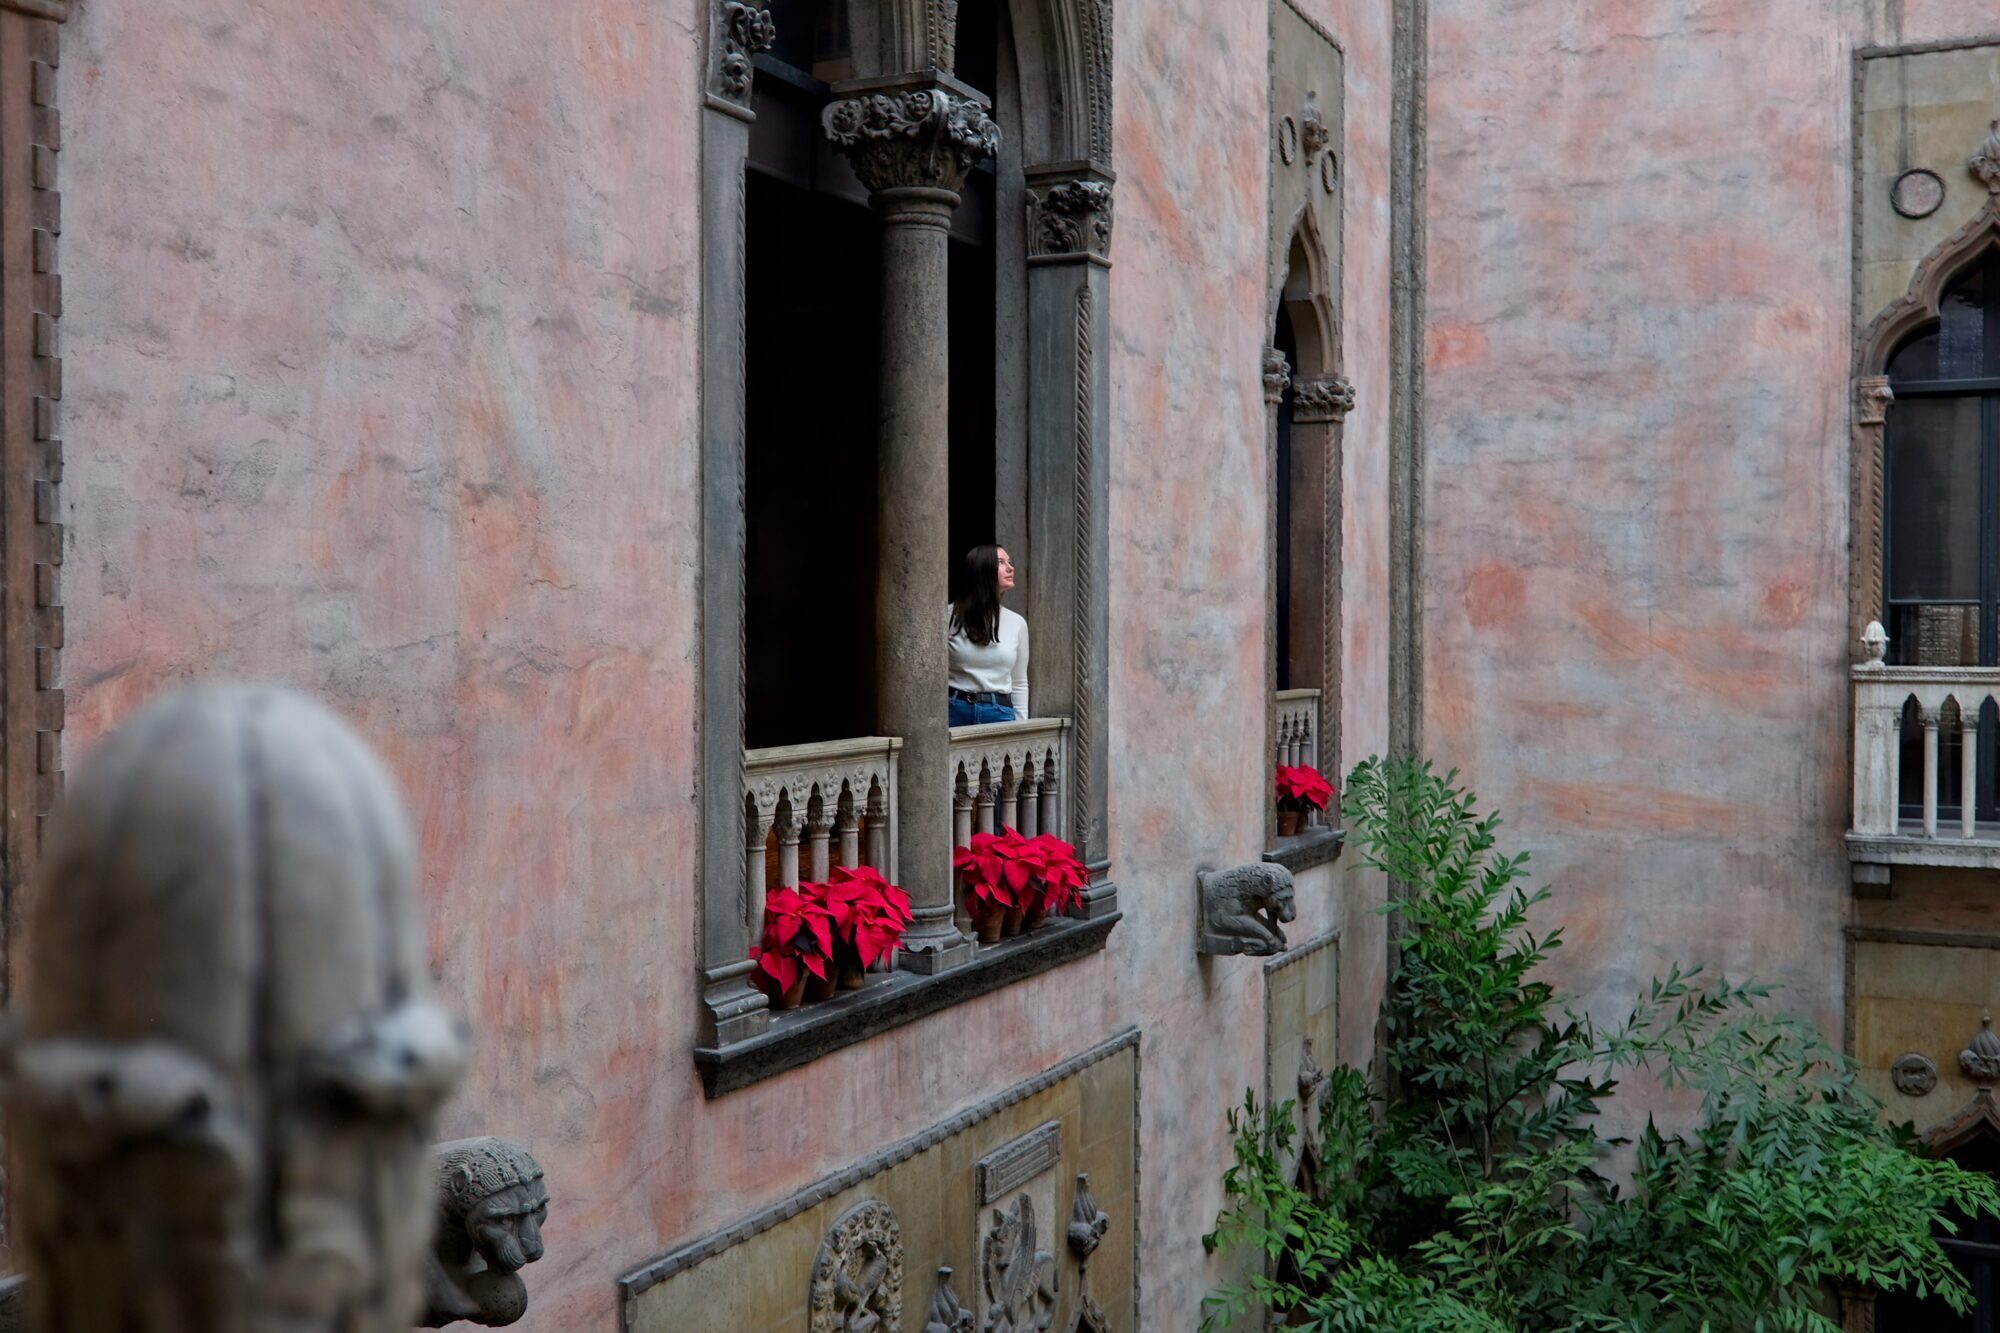 Alyssa looks out over the courtyard at the Isabella Stewart Gardner Museum